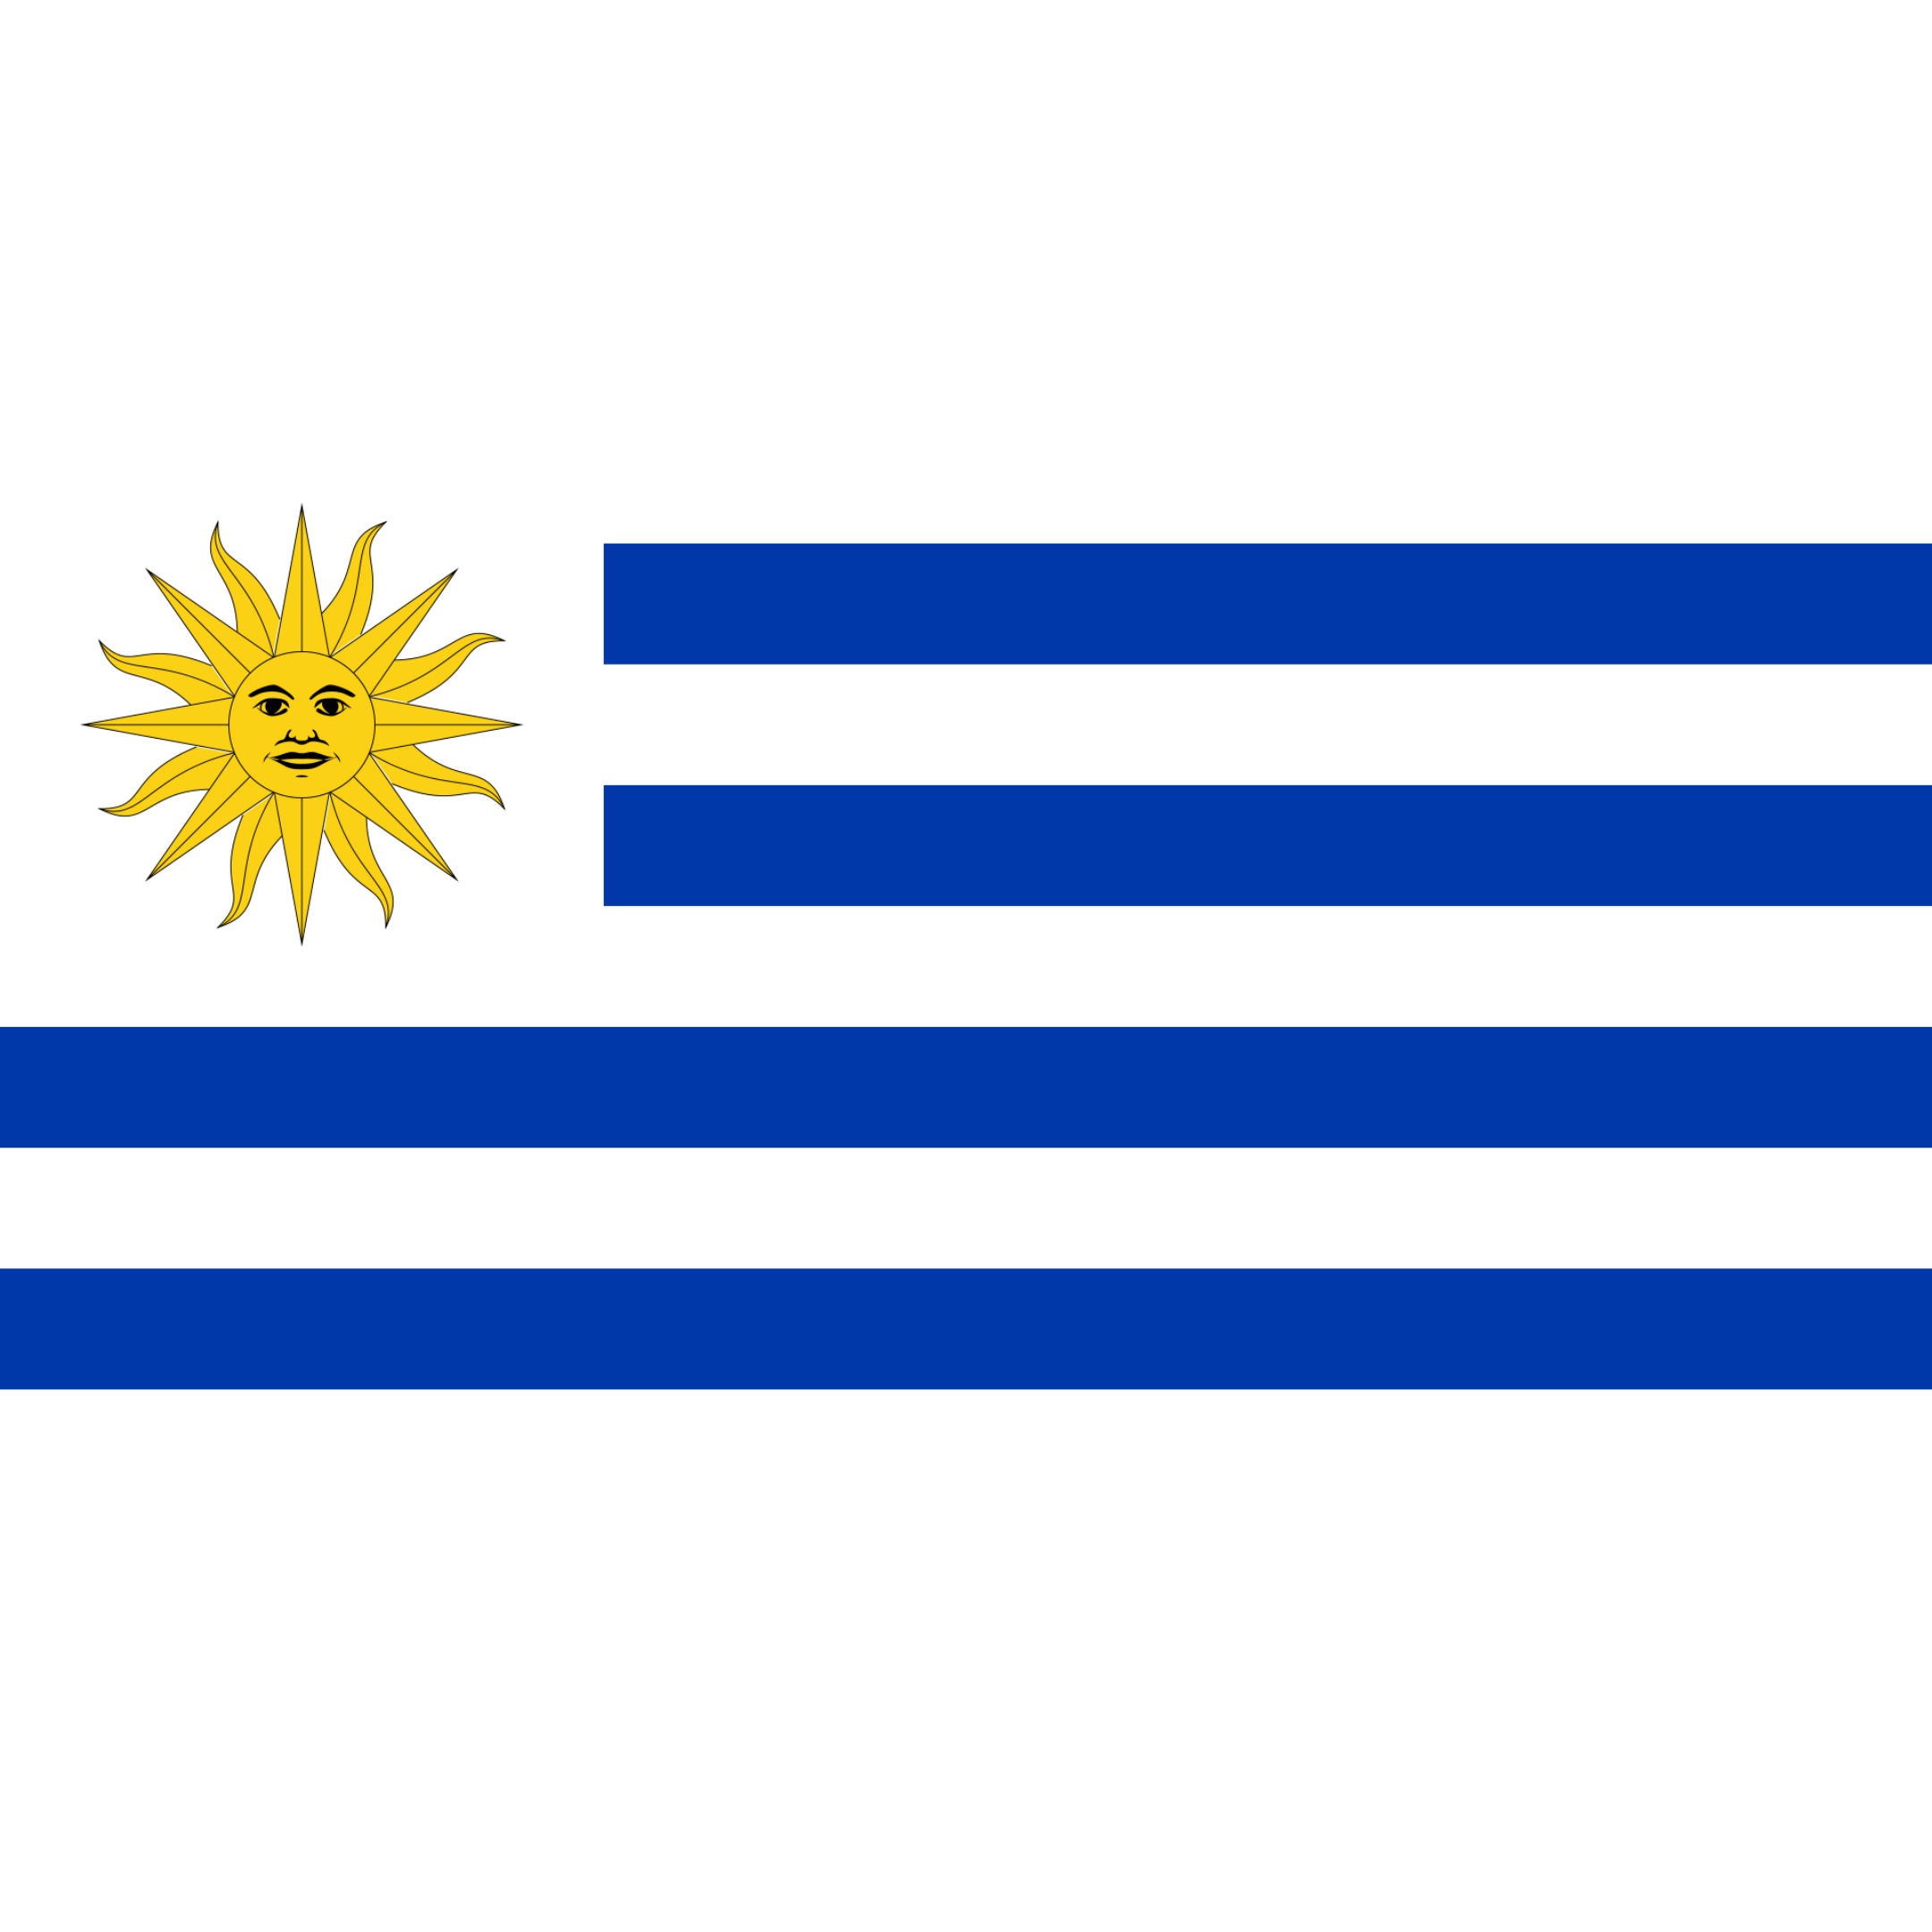 Uruguay's flag has 9 alternating white and blue horizontal stripes and a yellow sun on a white rectangle in the left corner.